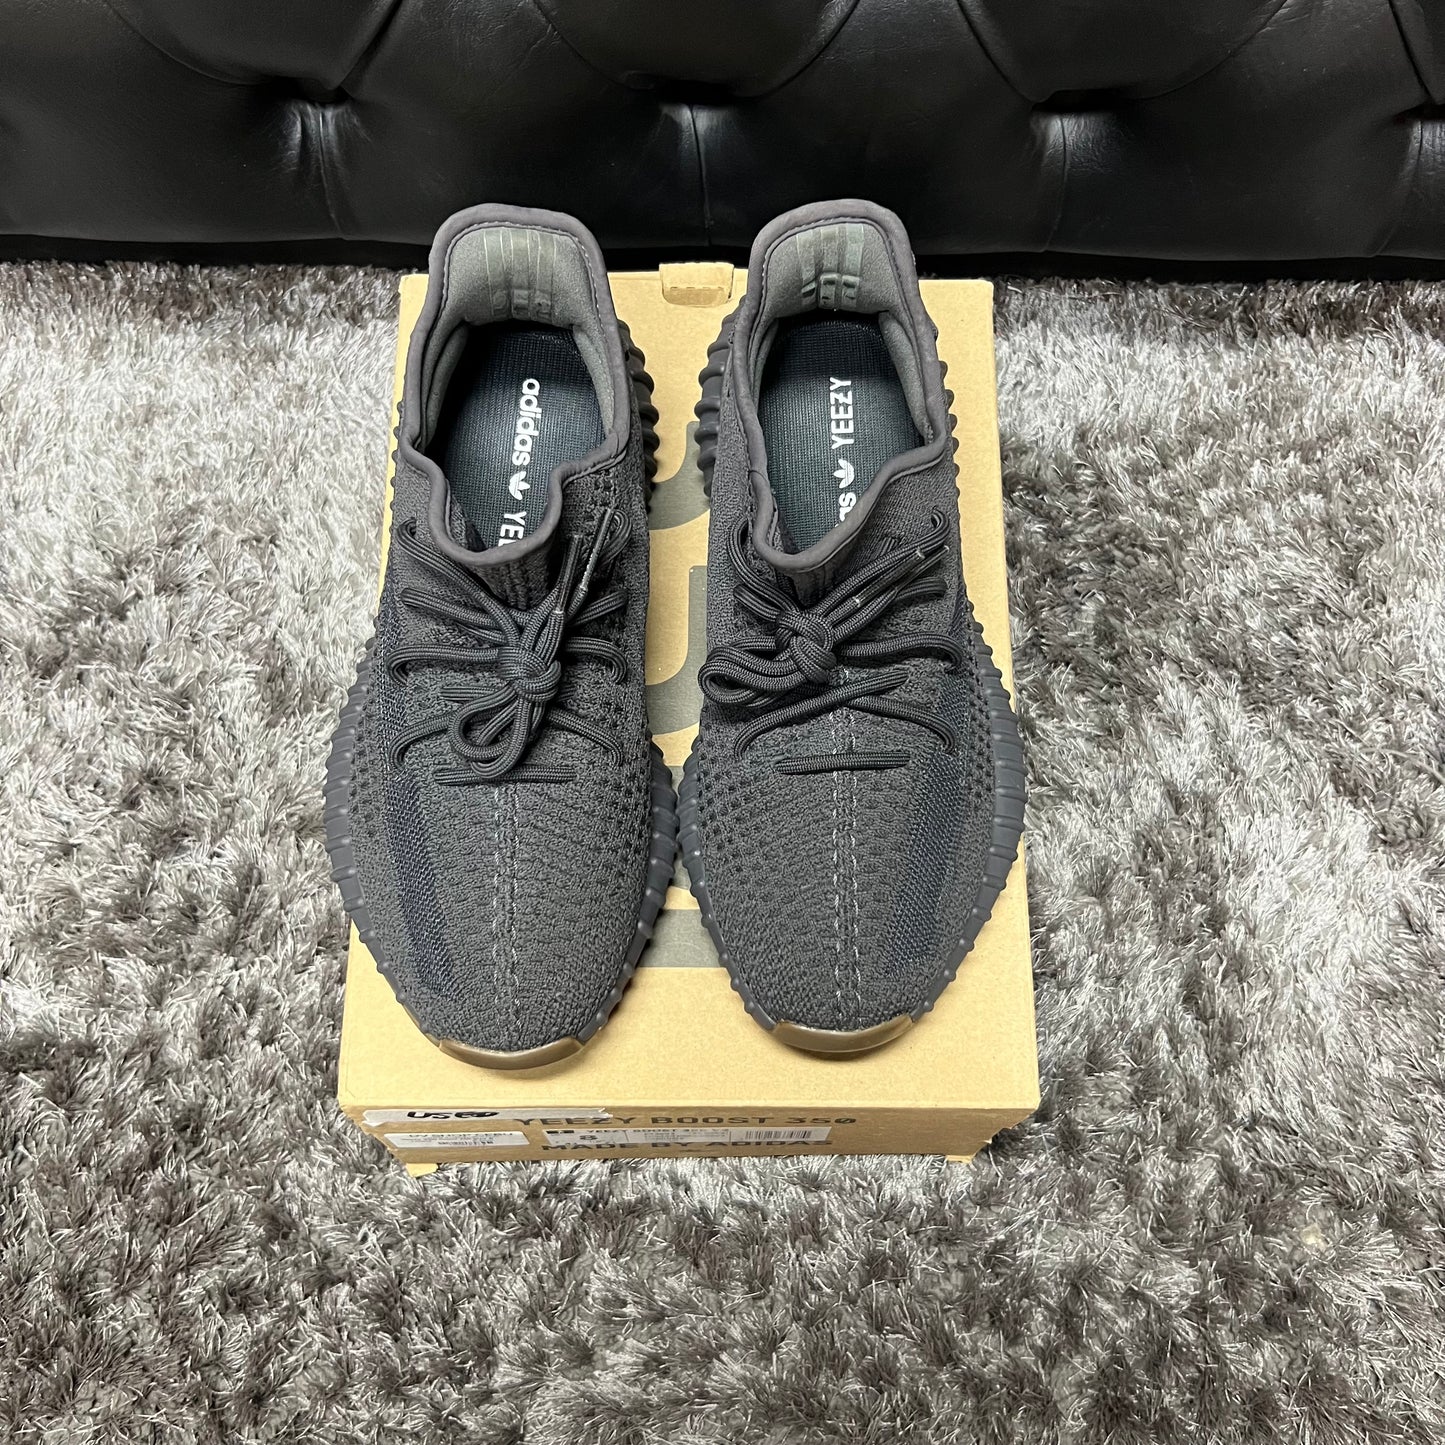 Yeezy 350 Cider NR size 8 used